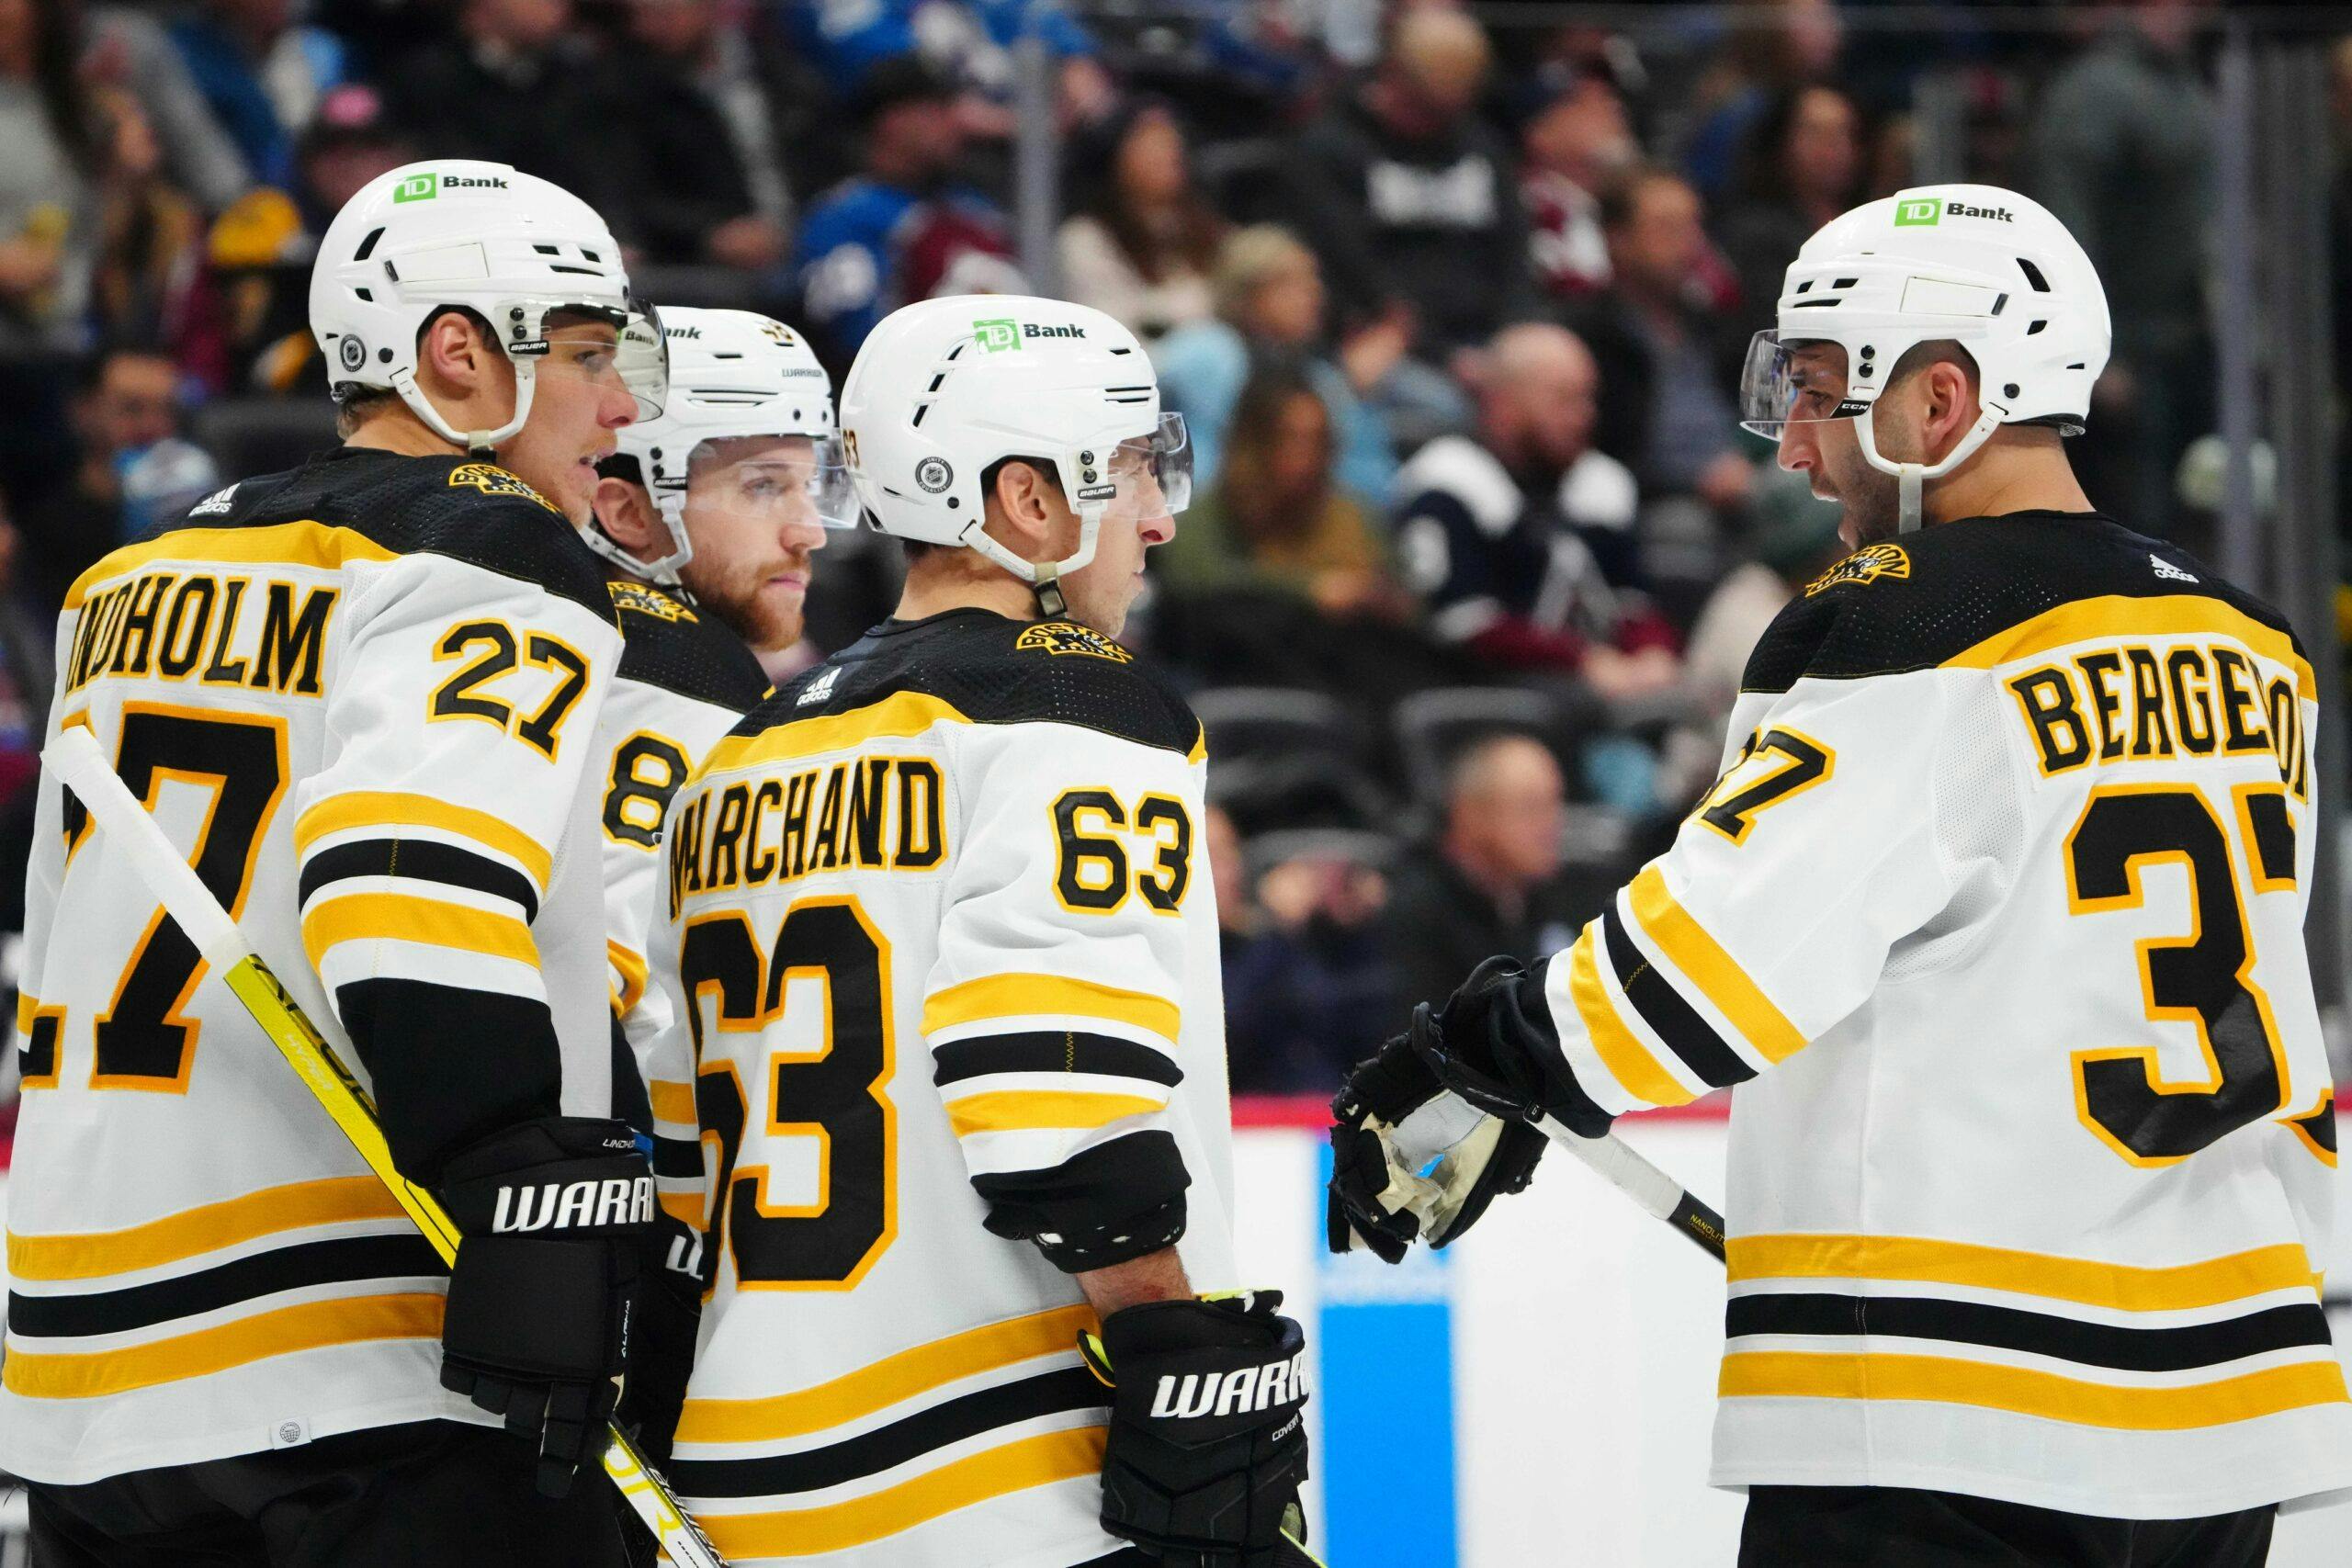 NHL Power Rankings: Boston Bruins end the Devils’ dynasty in the top spot